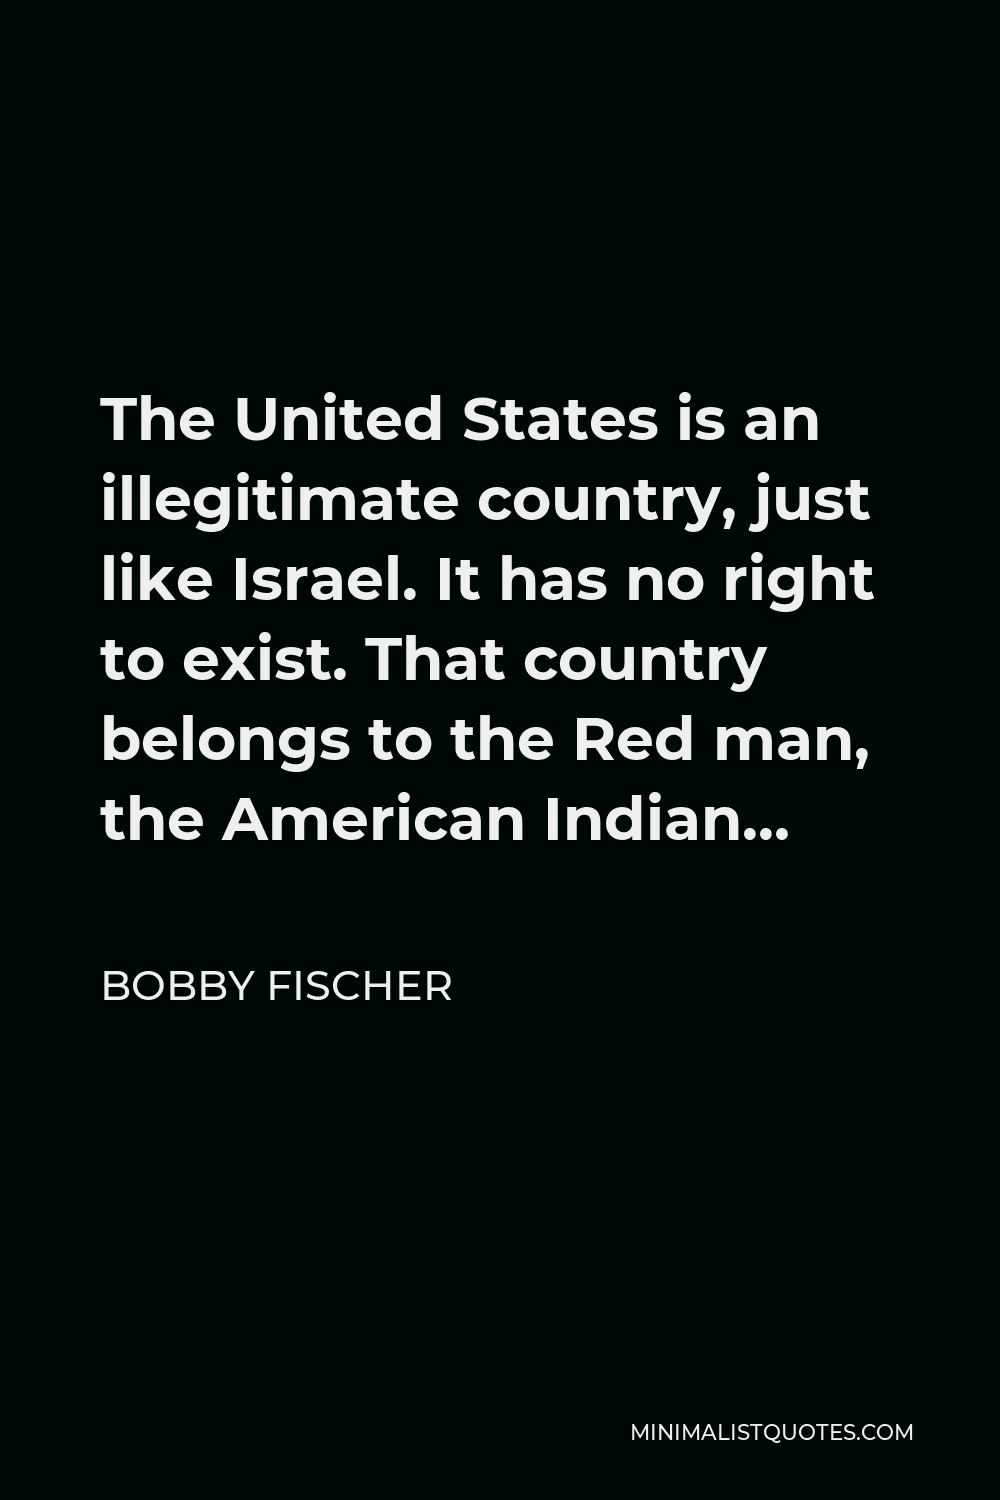 Bobby Fischer Quote - The United States is an illegitimate country, just like Israel. It has no right to exist. That country belongs to the Red man, the American Indian…